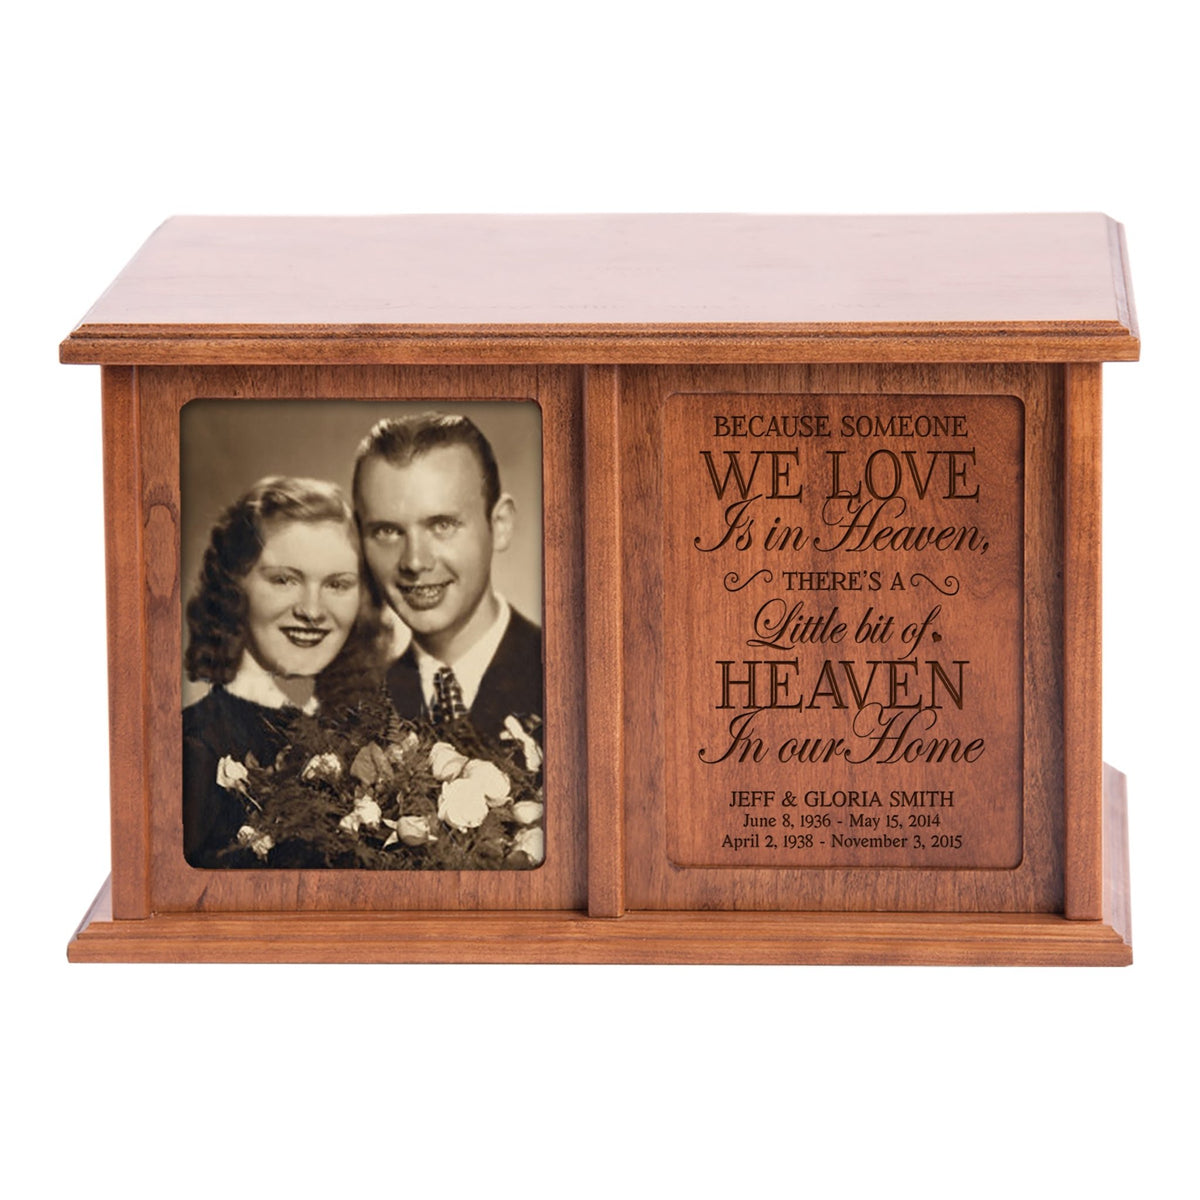 Personalized Extra Large Companion Urn Wooden Cremation Urn Box - Someone We Love - LifeSong Milestones